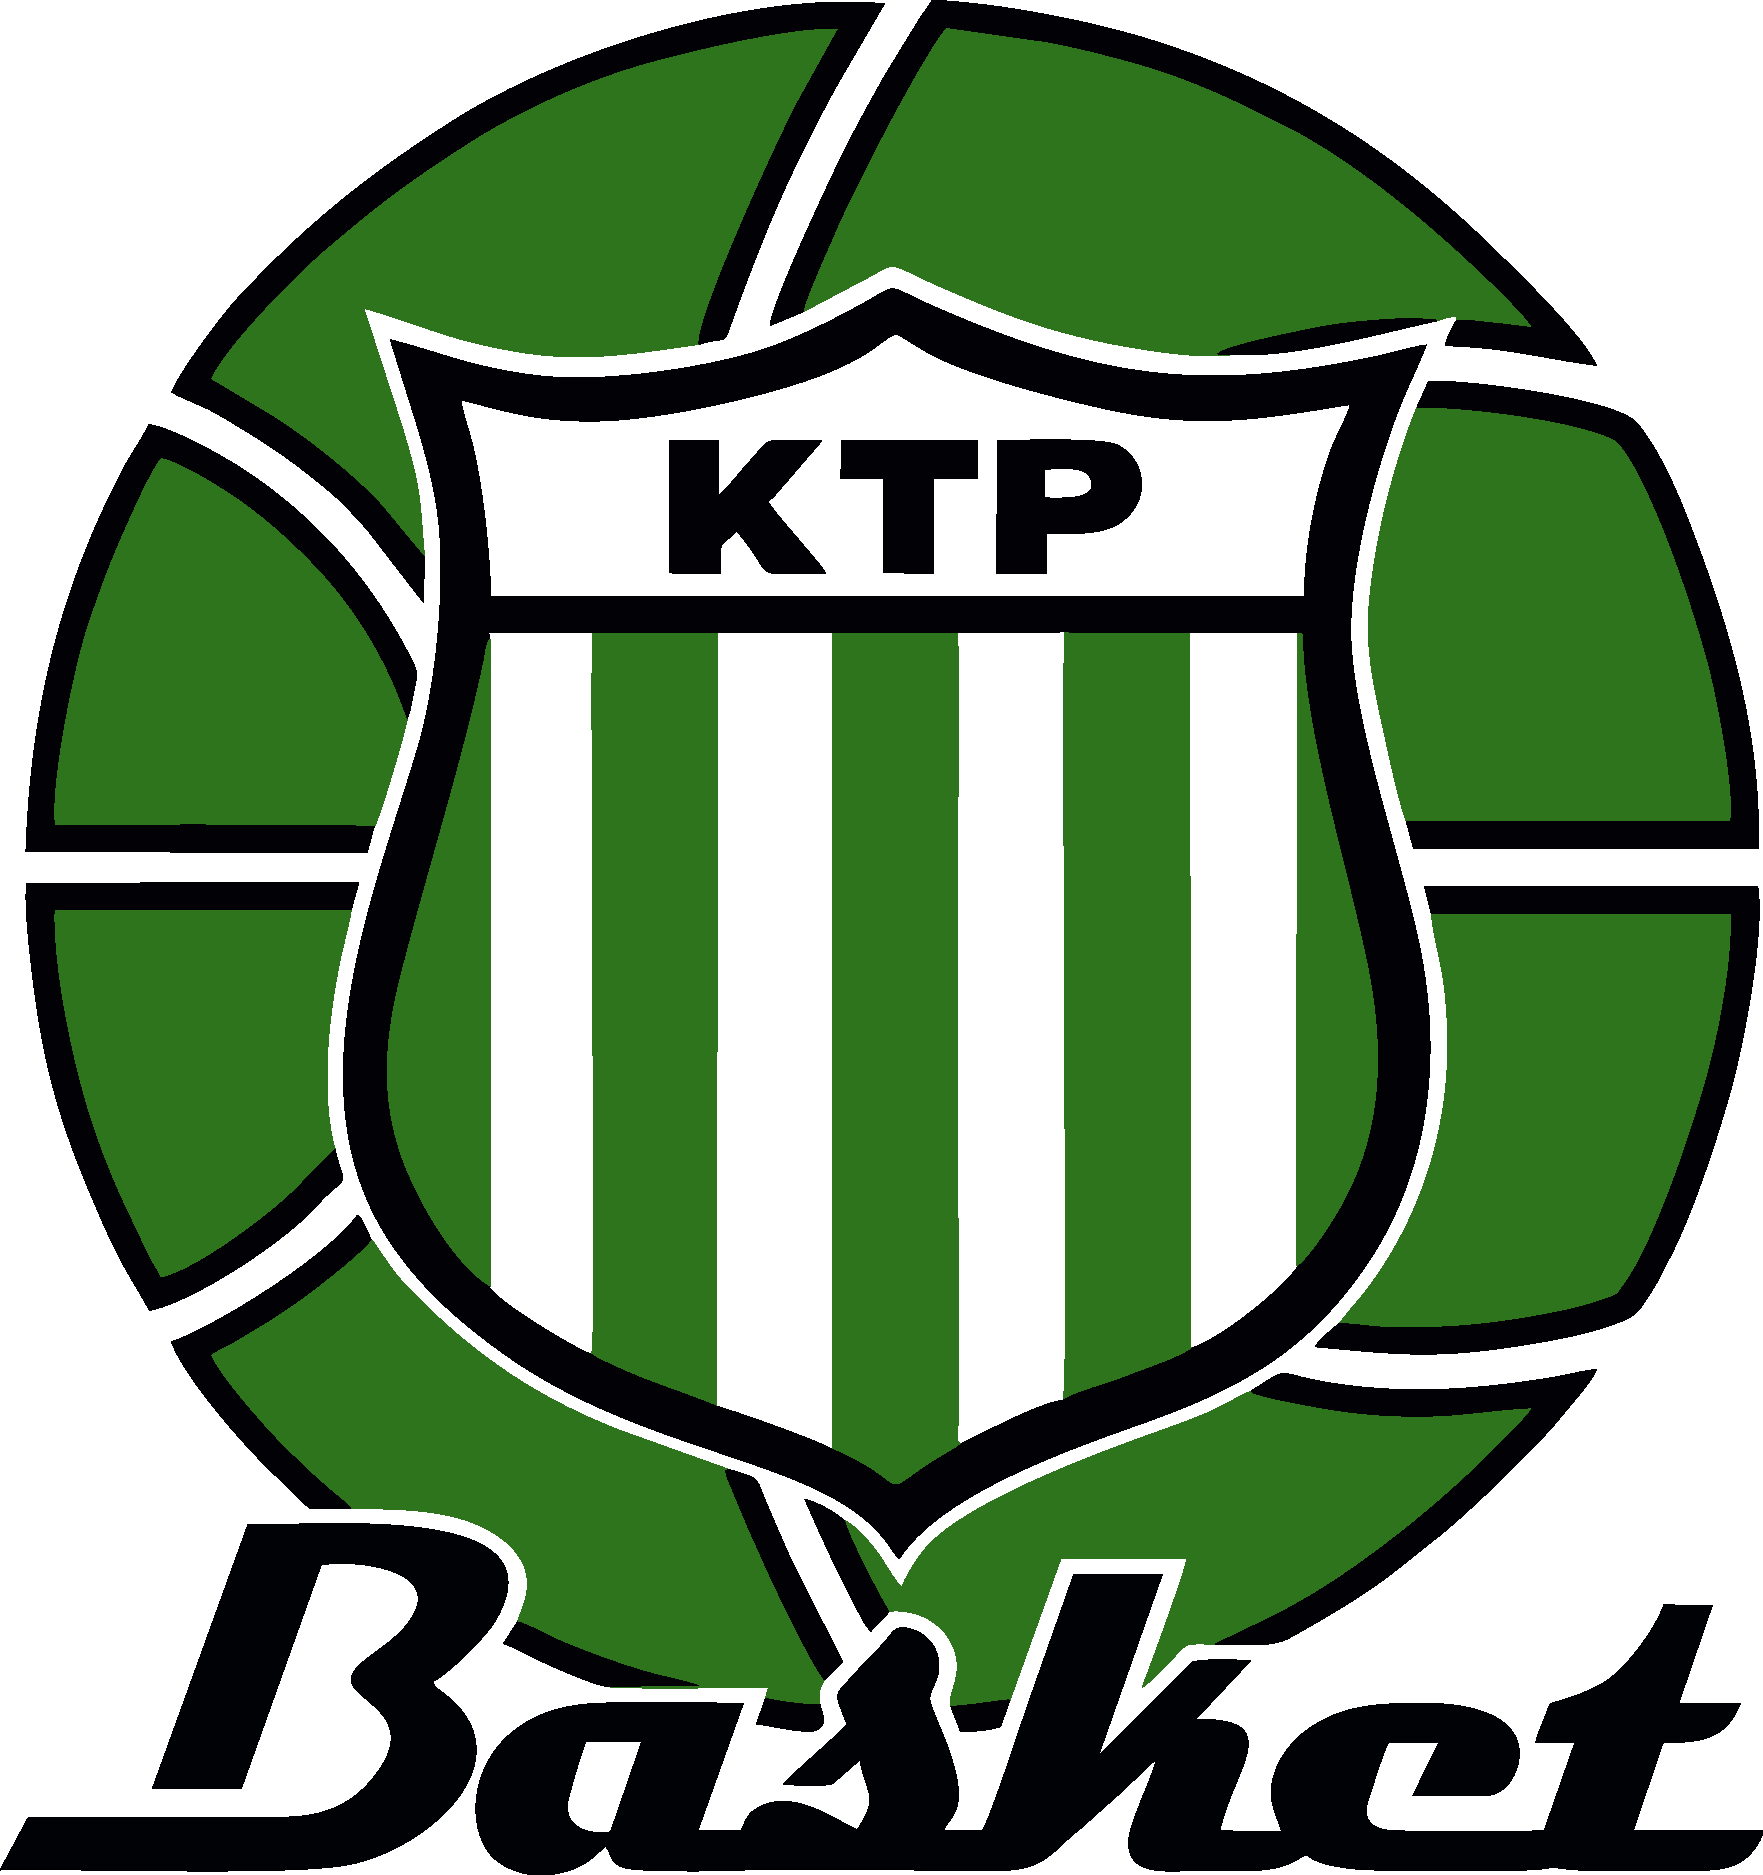 KTP - Apps on Google Play